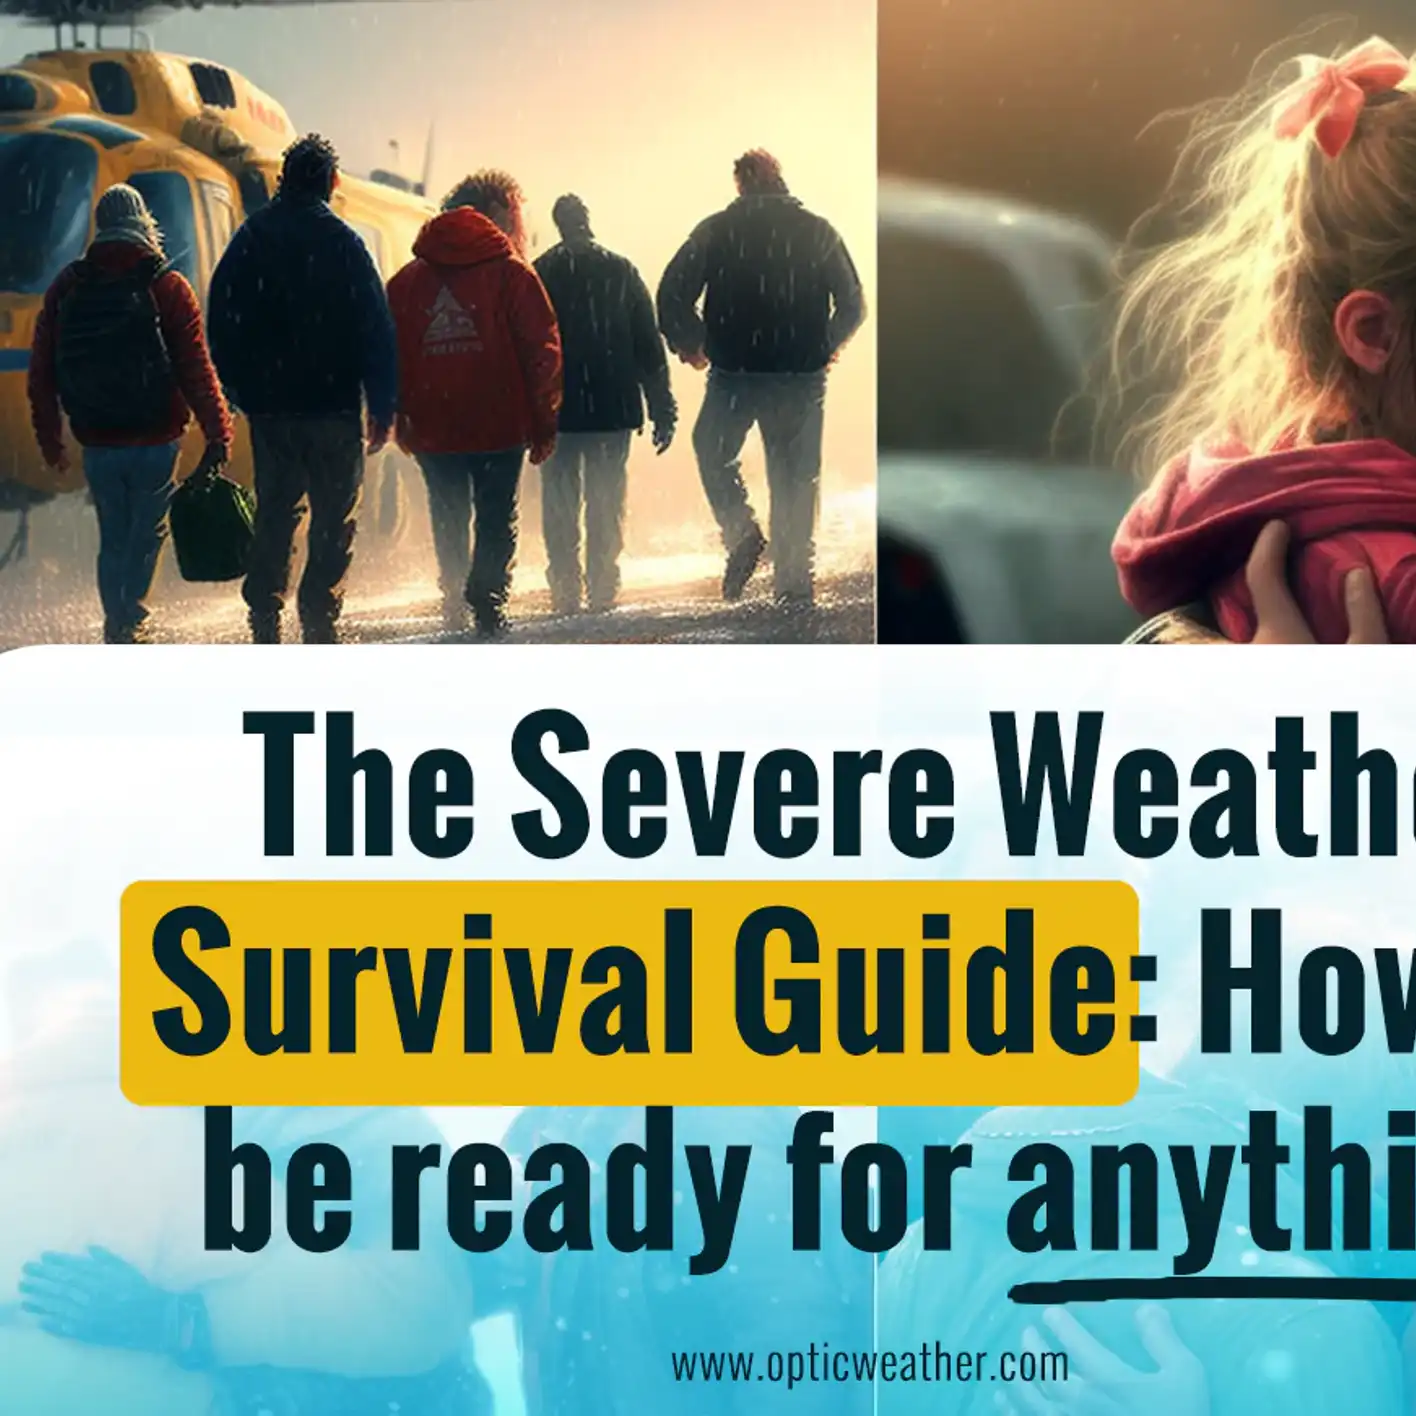 The severe weather survival guide: How to be ready for anything